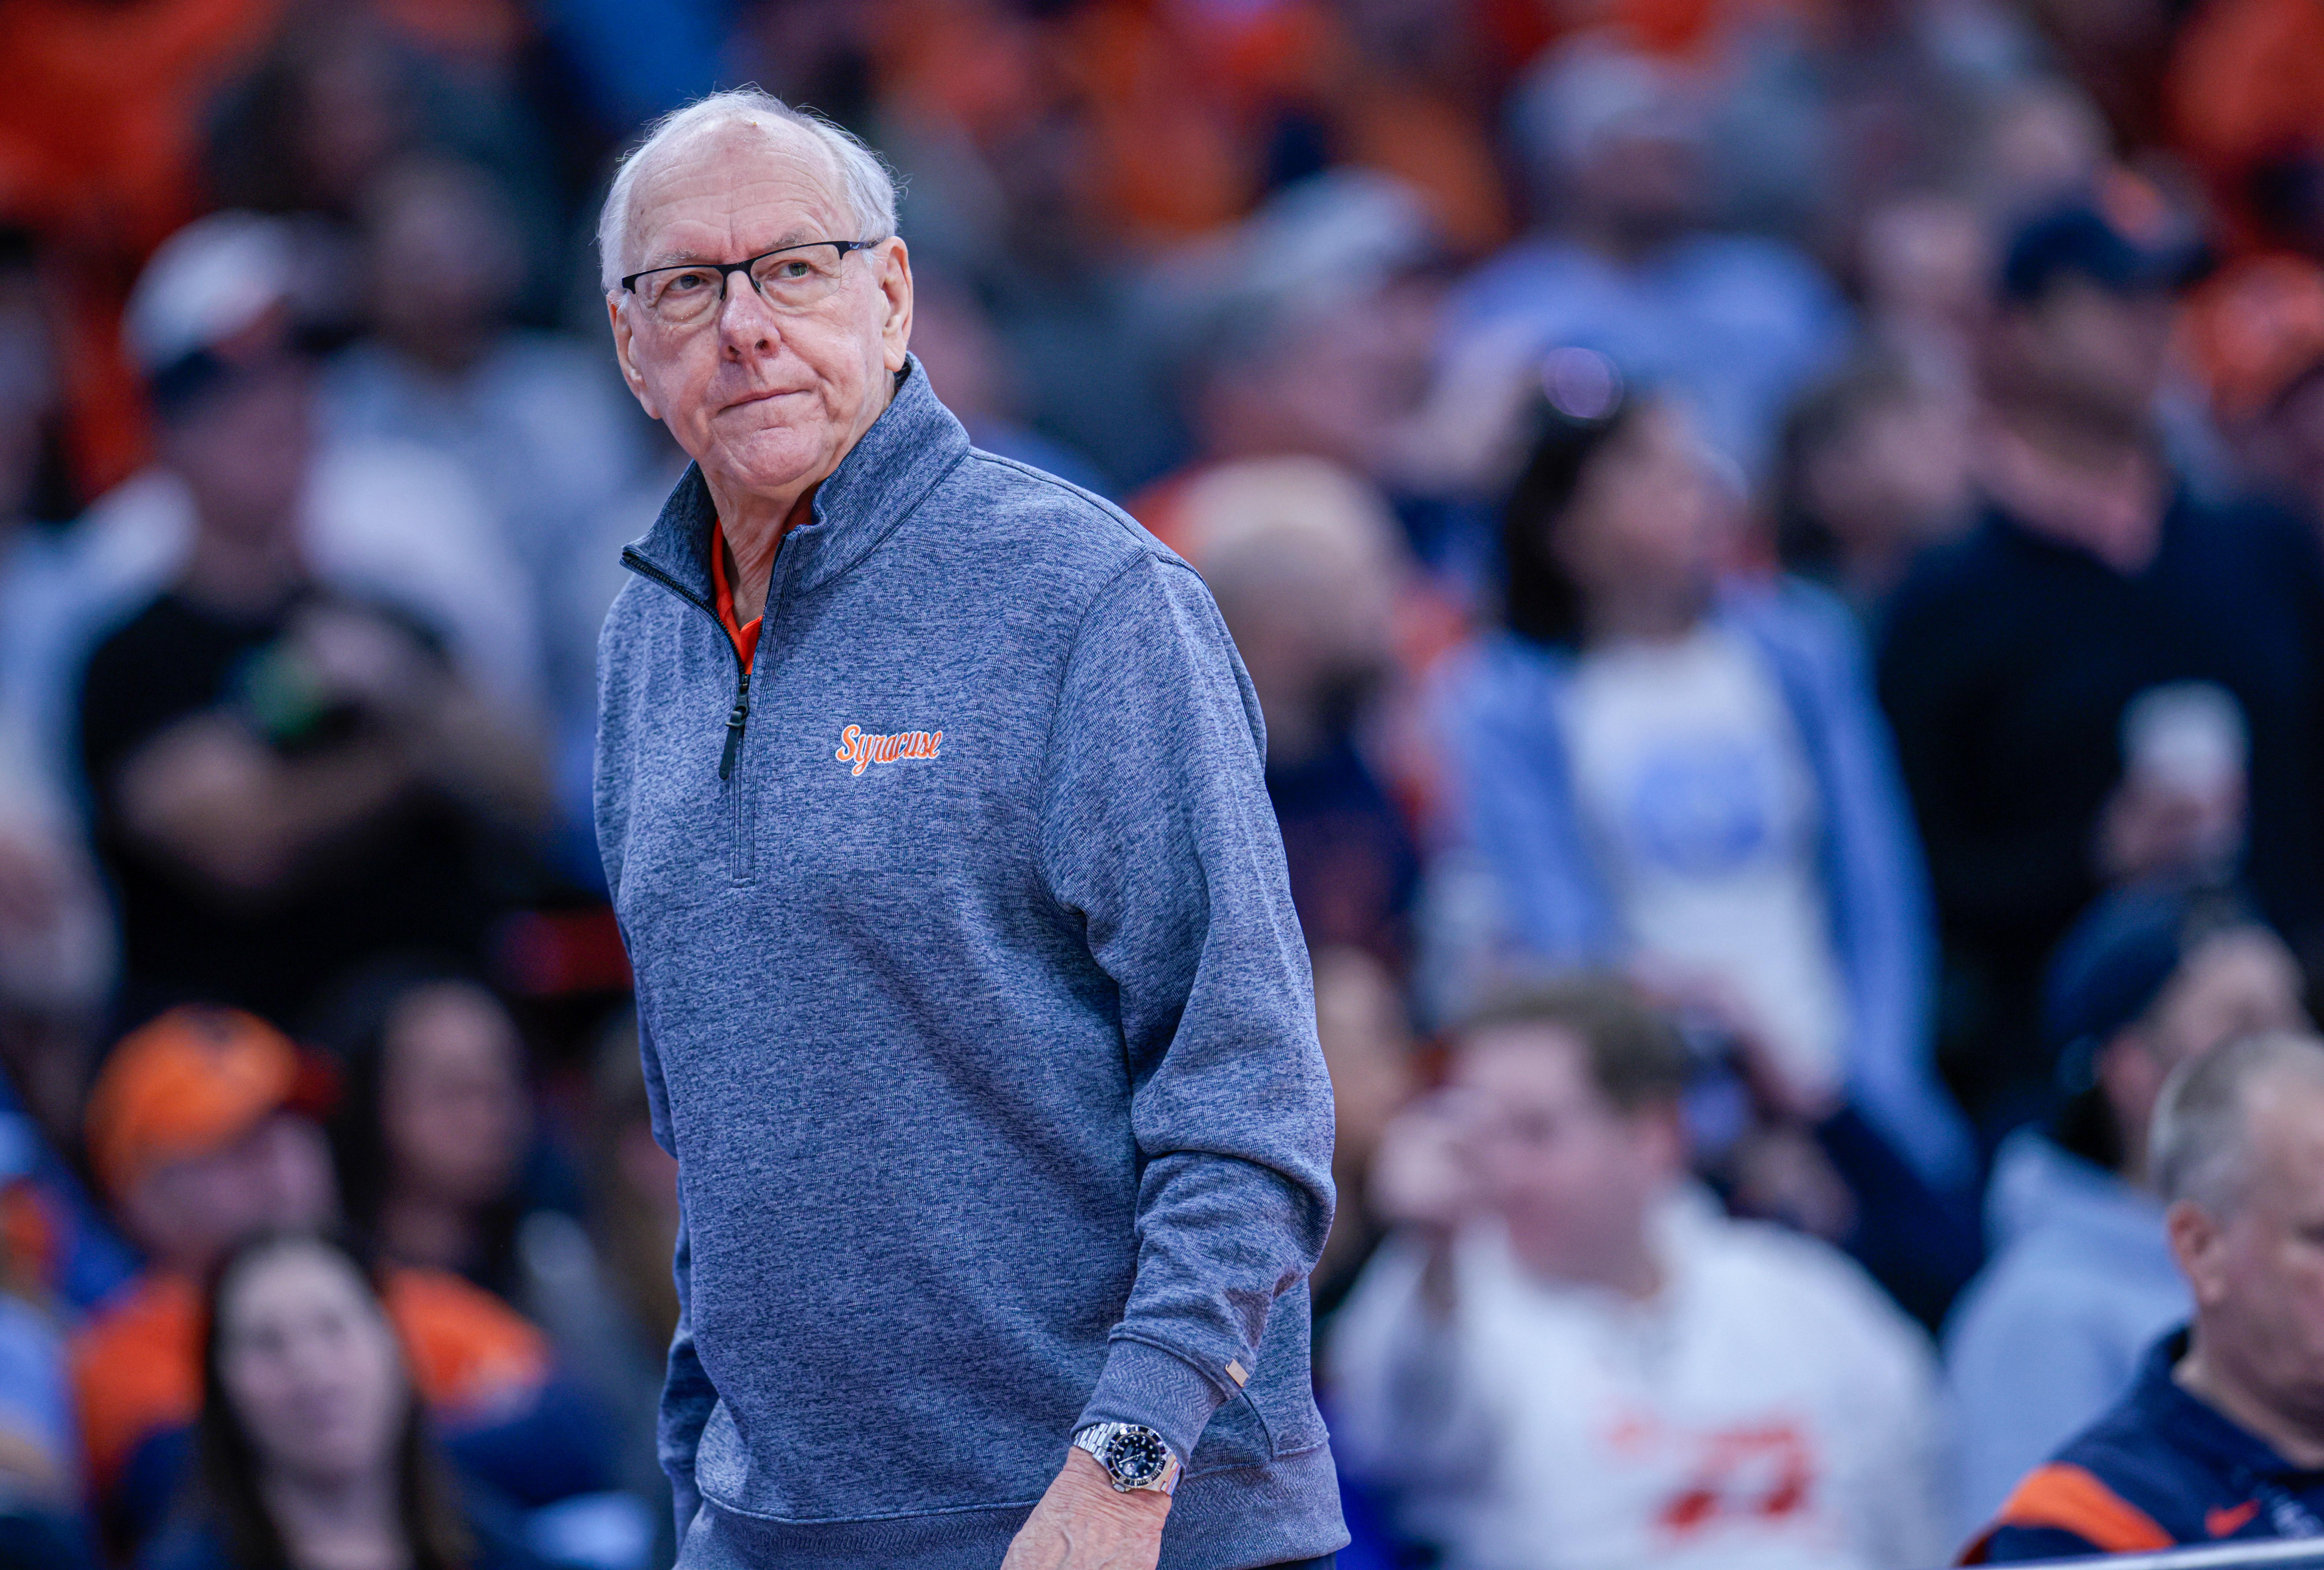 No one is cheering for Jim Boeheim after his latest press conference zeroes